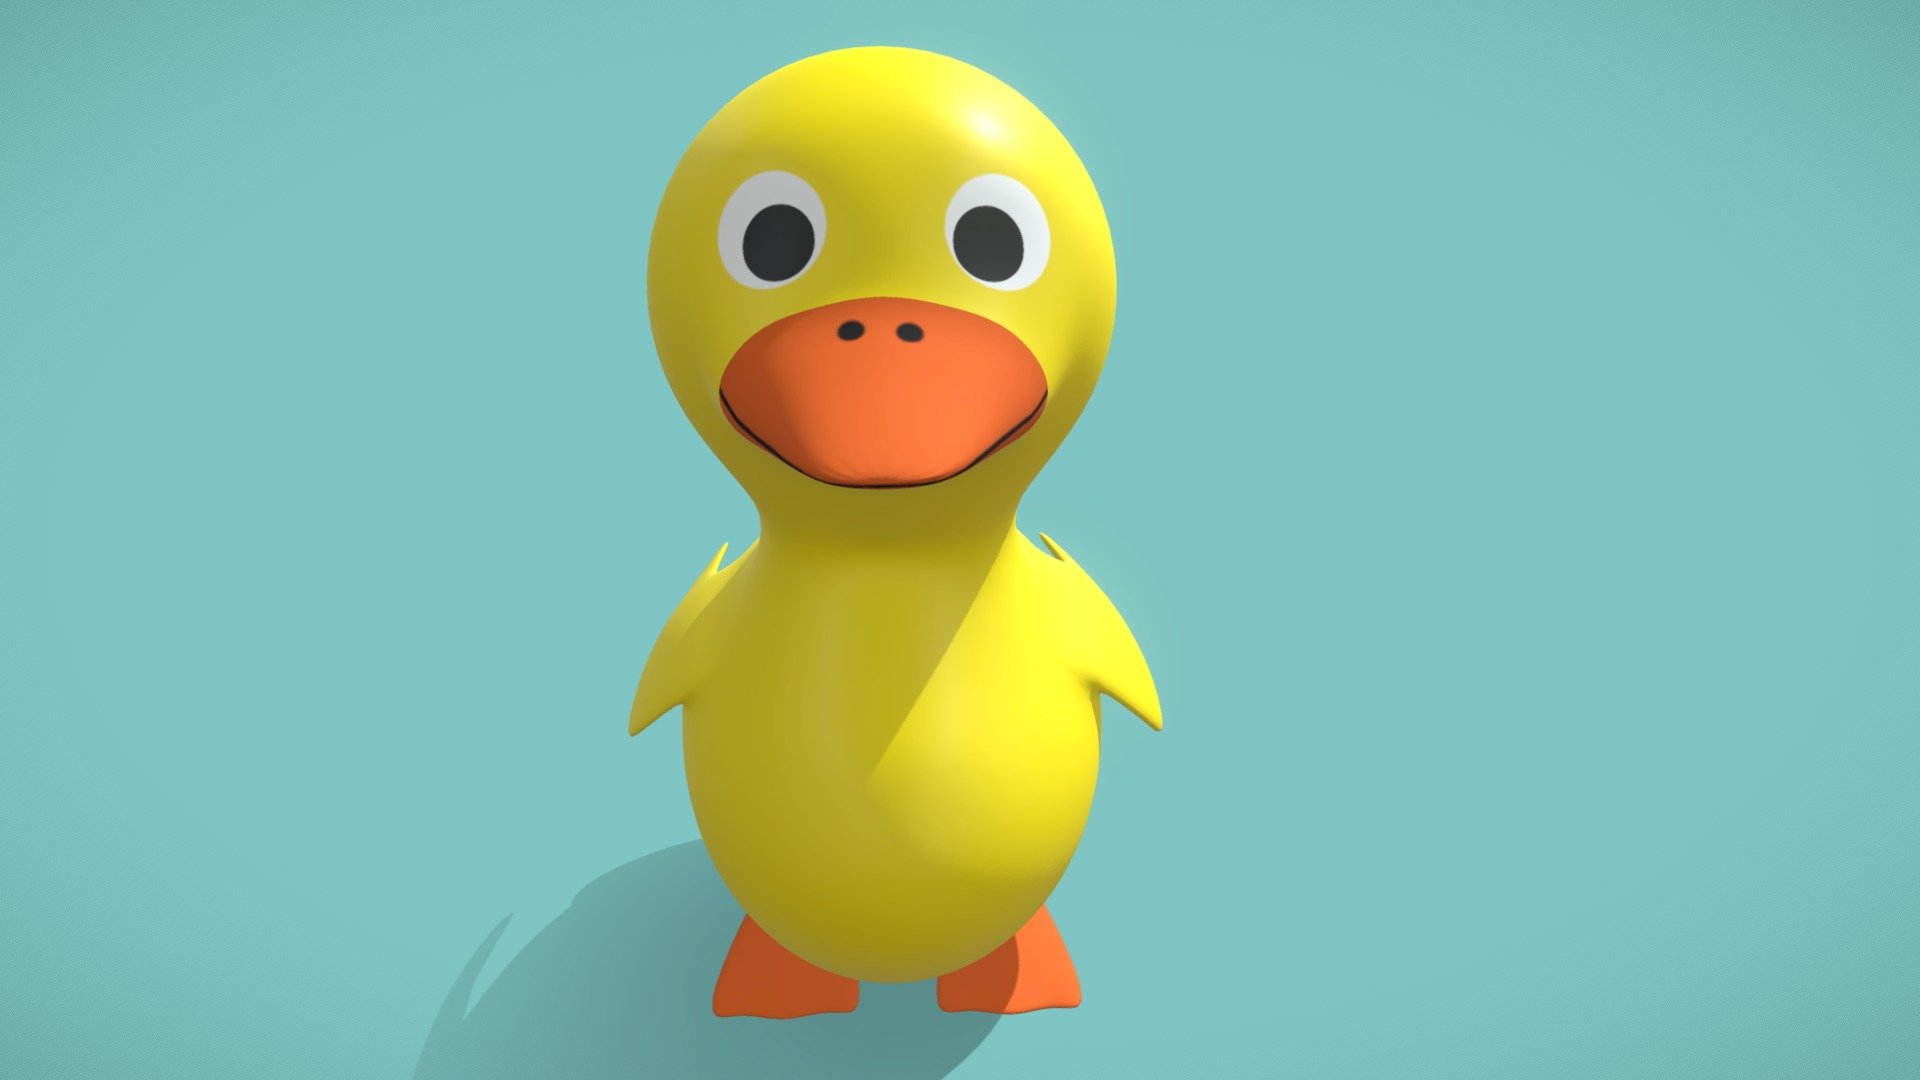 Low poly super clean mesh baby duck. It was a first try to handpaint and model in a more comic-like style. 
The overall mesh came out well but I think I would sculpt it the next time even if the mesh doesn't get that clean then 3d model